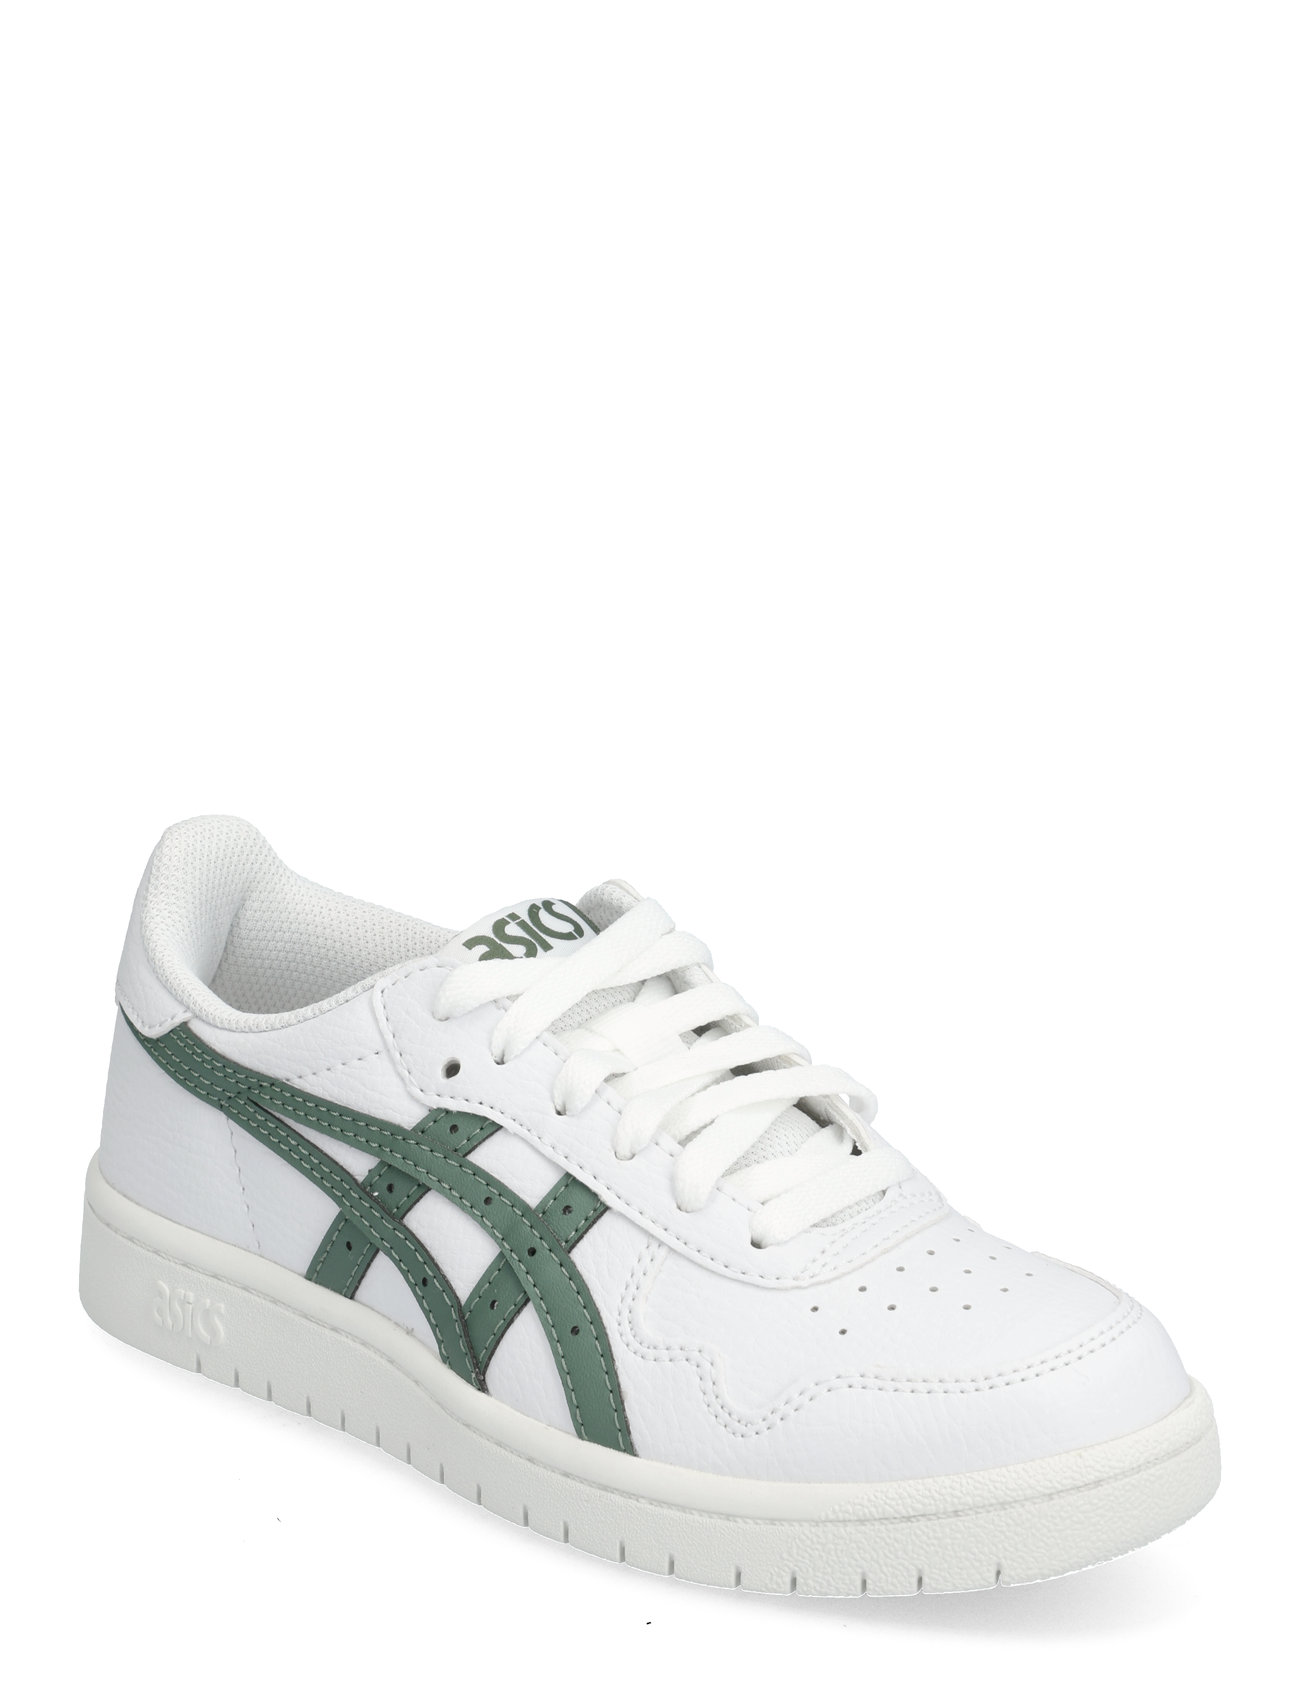 Asics "Japan S Gs Sport Sneakers Low-top White Asics"